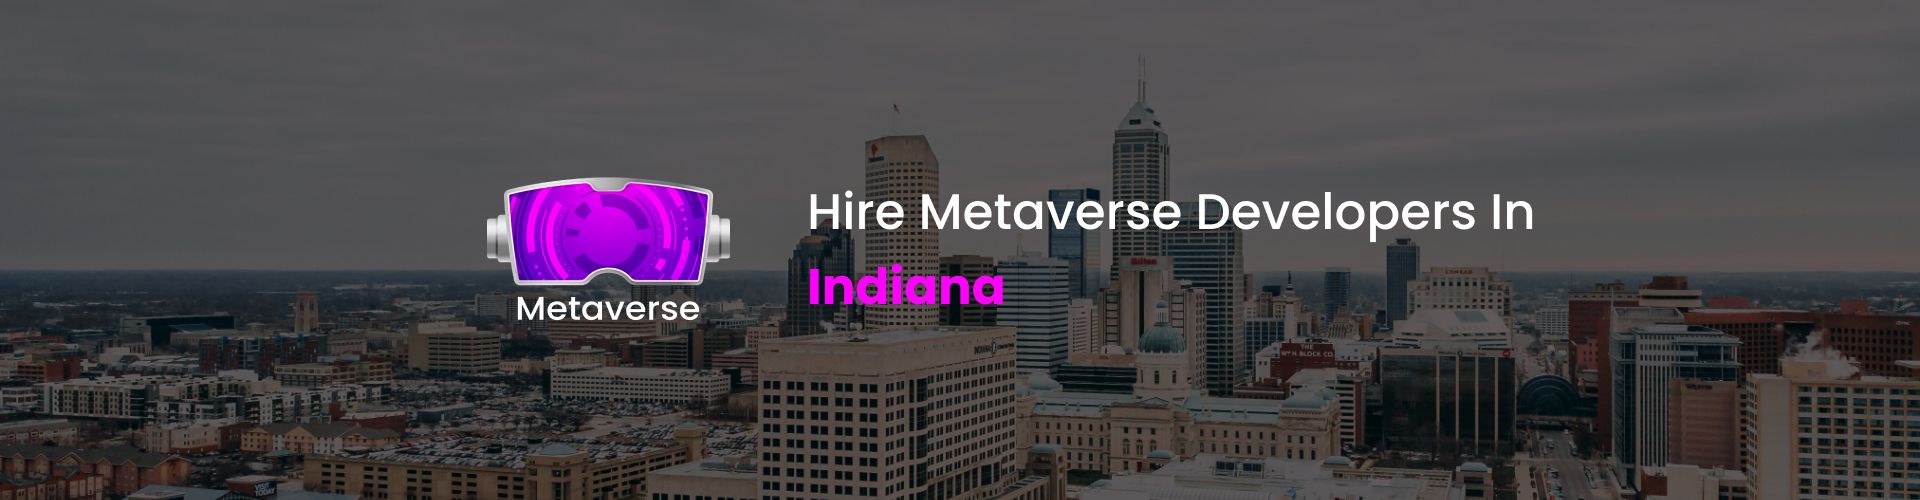 hire metaverse developers in indiana